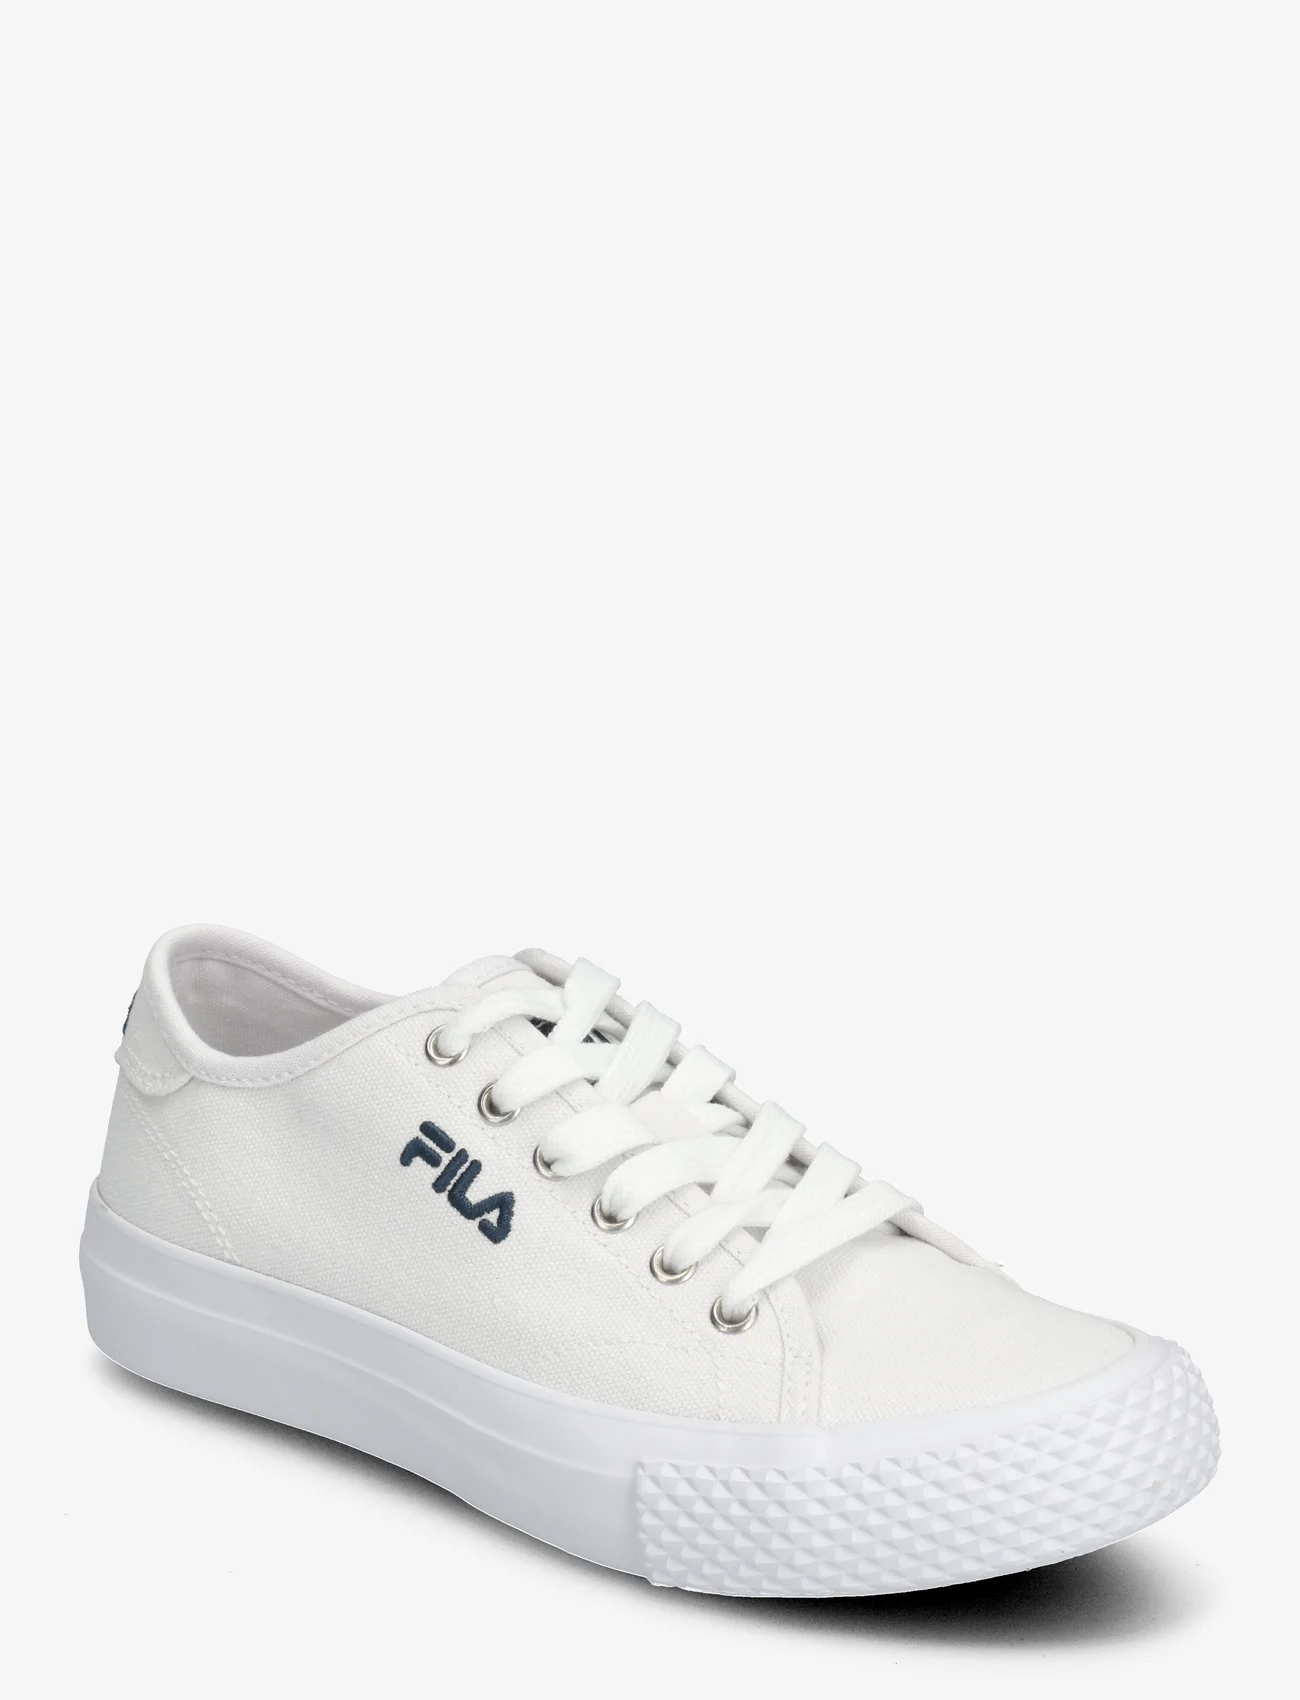 FILA - POINTER CLASSIC teens - canvas sneakers - white - 0